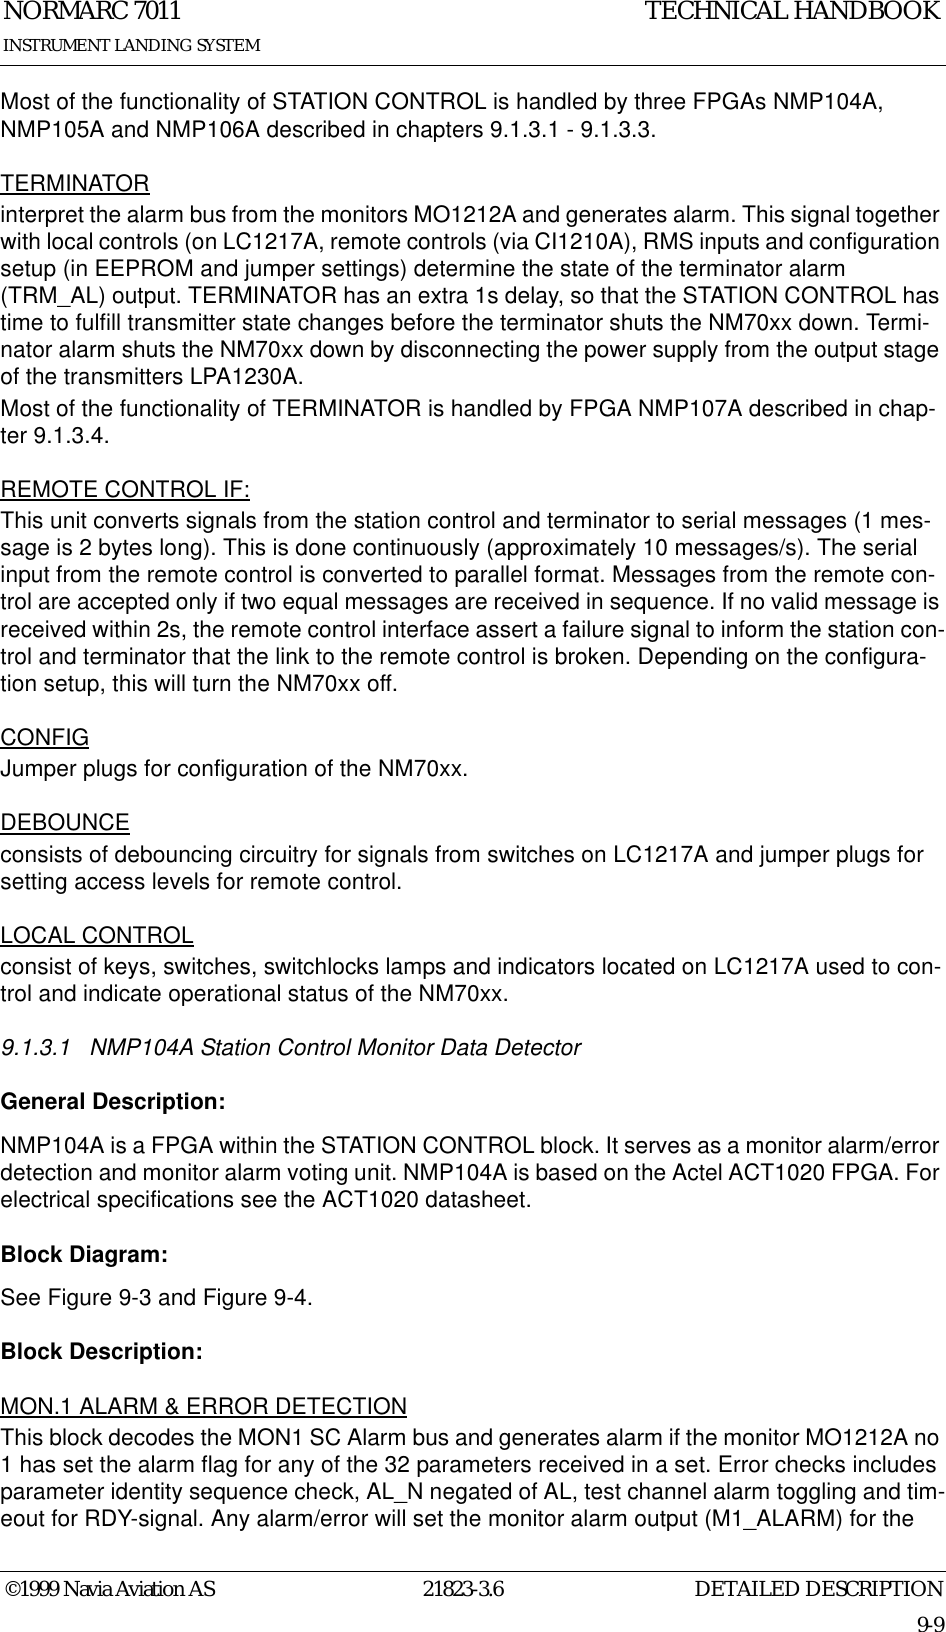 DETAILED DESCRIPTIONNORMARC 701121823-3.69-9INSTRUMENT LANDING SYSTEMTECHNICAL HANDBOOK©1999 Navia Aviation ASMost of the functionality of STATION CONTROL is handled by three FPGAs NMP104A, NMP105A and NMP106A described in chapters 9.1.3.1 - 9.1.3.3.TERMINATORinterpret the alarm bus from the monitors MO1212A and generates alarm. This signal together with local controls (on LC1217A, remote controls (via CI1210A), RMS inputs and configuration setup (in EEPROM and jumper settings) determine the state of the terminator alarm (TRM_AL) output. TERMINATOR has an extra 1s delay, so that the STATION CONTROL has time to fulfill transmitter state changes before the terminator shuts the NM70xx down. Termi-nator alarm shuts the NM70xx down by disconnecting the power supply from the output stage of the transmitters LPA1230A.Most of the functionality of TERMINATOR is handled by FPGA NMP107A described in chap-ter 9.1.3.4.REMOTE CONTROL IF:This unit converts signals from the station control and terminator to serial messages (1 mes-sage is 2 bytes long). This is done continuously (approximately 10 messages/s). The serial input from the remote control is converted to parallel format. Messages from the remote con-trol are accepted only if two equal messages are received in sequence. If no valid message is received within 2s, the remote control interface assert a failure signal to inform the station con-trol and terminator that the link to the remote control is broken. Depending on the configura-tion setup, this will turn the NM70xx off.CONFIGJumper plugs for configuration of the NM70xx.DEBOUNCEconsists of debouncing circuitry for signals from switches on LC1217A and jumper plugs for setting access levels for remote control.LOCAL CONTROLconsist of keys, switches, switchlocks lamps and indicators located on LC1217A used to con-trol and indicate operational status of the NM70xx.9.1.3.1 NMP104A Station Control Monitor Data DetectorGeneral Description:NMP104A is a FPGA within the STATION CONTROL block. It serves as a monitor alarm/error detection and monitor alarm voting unit. NMP104A is based on the Actel ACT1020 FPGA. For electrical specifications see the ACT1020 datasheet.Block Diagram:See Figure 9-3 and Figure 9-4.Block Description:MON.1 ALARM &amp; ERROR DETECTIONThis block decodes the MON1 SC Alarm bus and generates alarm if the monitor MO1212A no 1 has set the alarm flag for any of the 32 parameters received in a set. Error checks includes parameter identity sequence check, AL_N negated of AL, test channel alarm toggling and tim-eout for RDY-signal. Any alarm/error will set the monitor alarm output (M1_ALARM) for the 